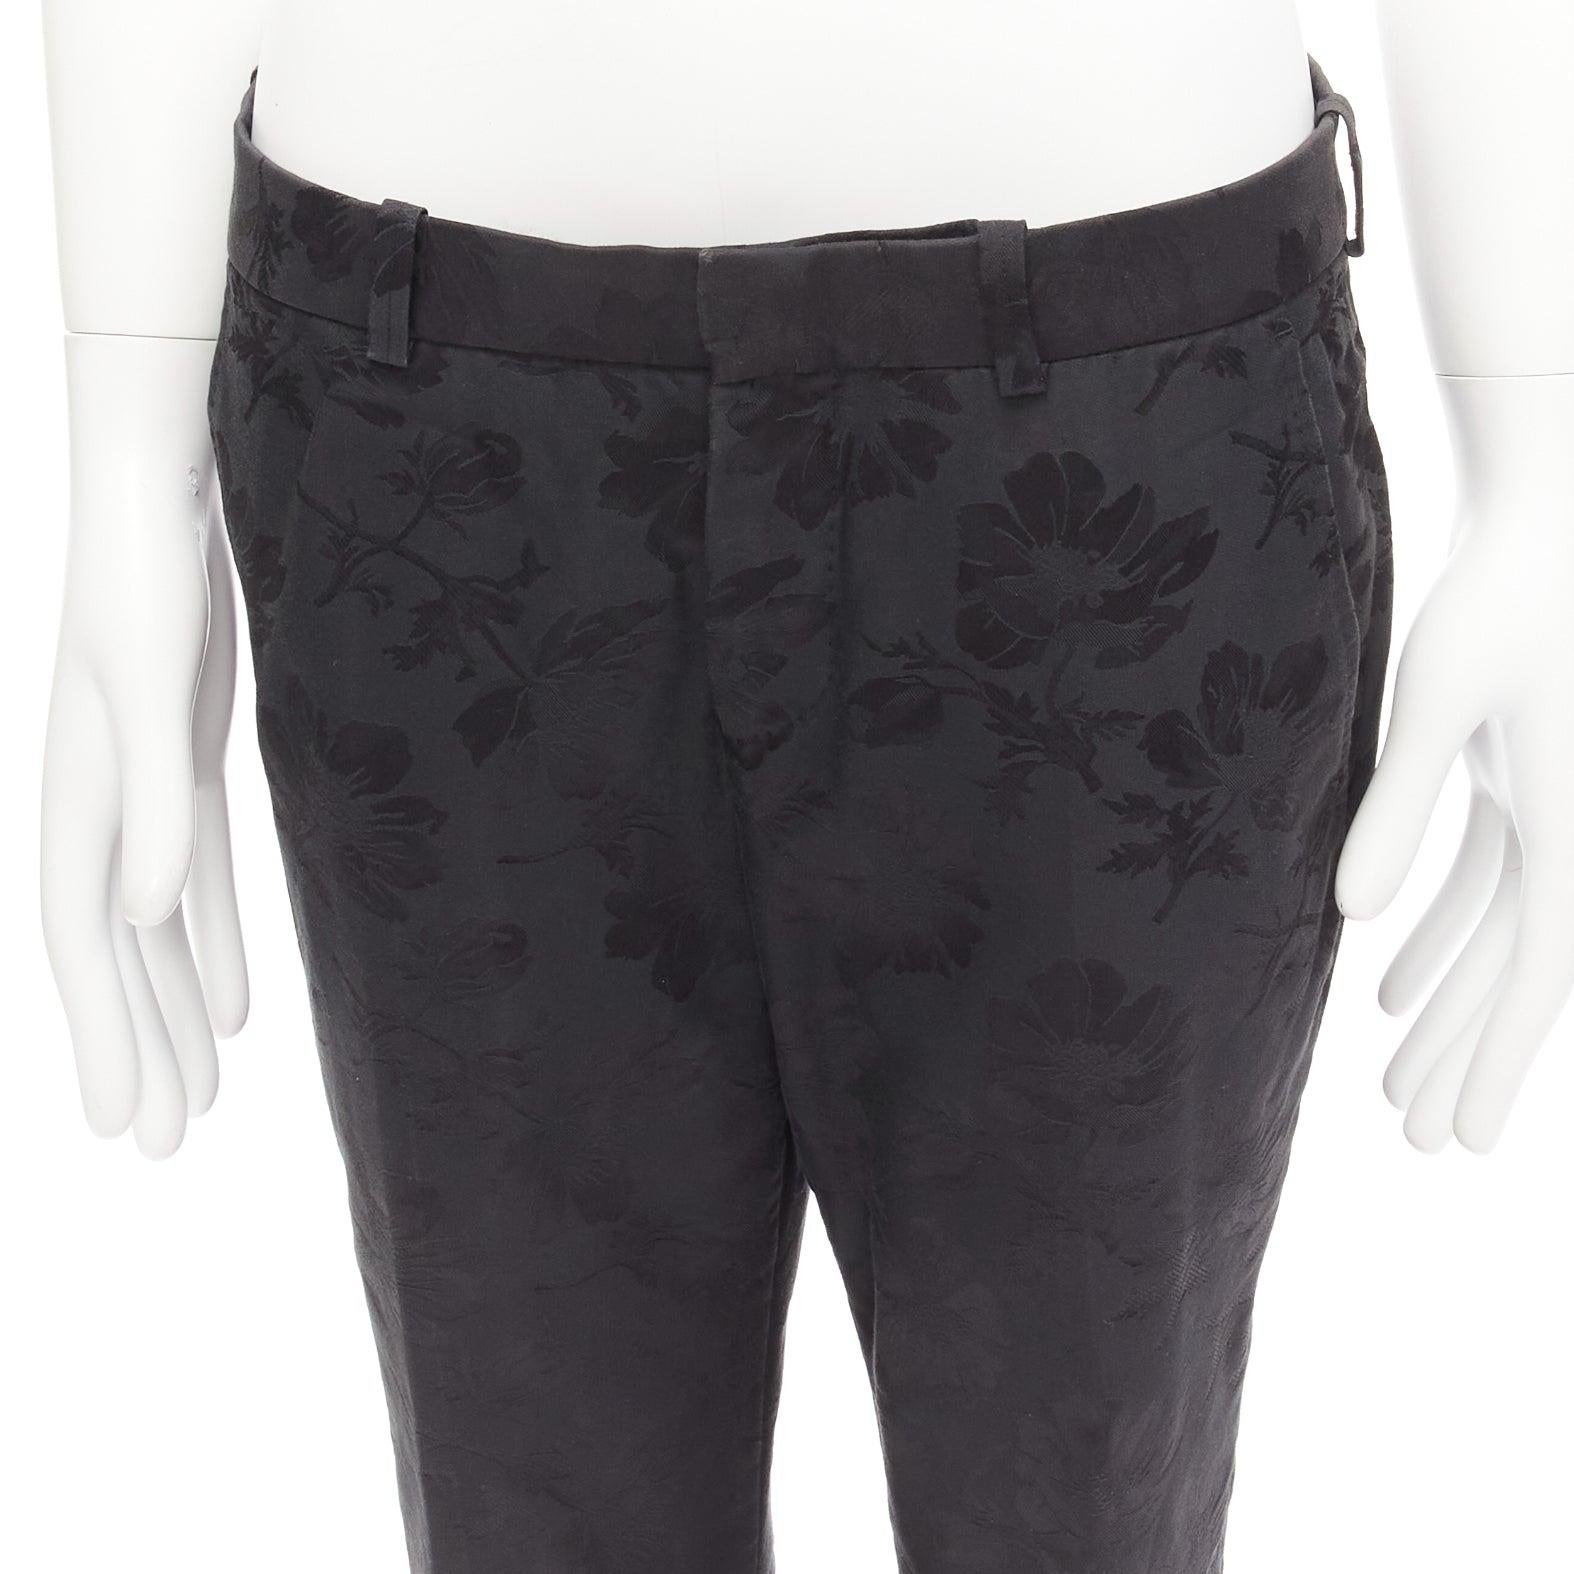 ALEXANDER MCQUEEN 2015 black floral jacquard tapered dress pants IT46 S
Reference: CNLE/A00251
Brand: Alexander McQueen
Collection: 2015
Material: Cotton, Silk
Color: Black
Pattern: Barocco
Closure: Zip Fly
Lining: Black Fabric
Made in: